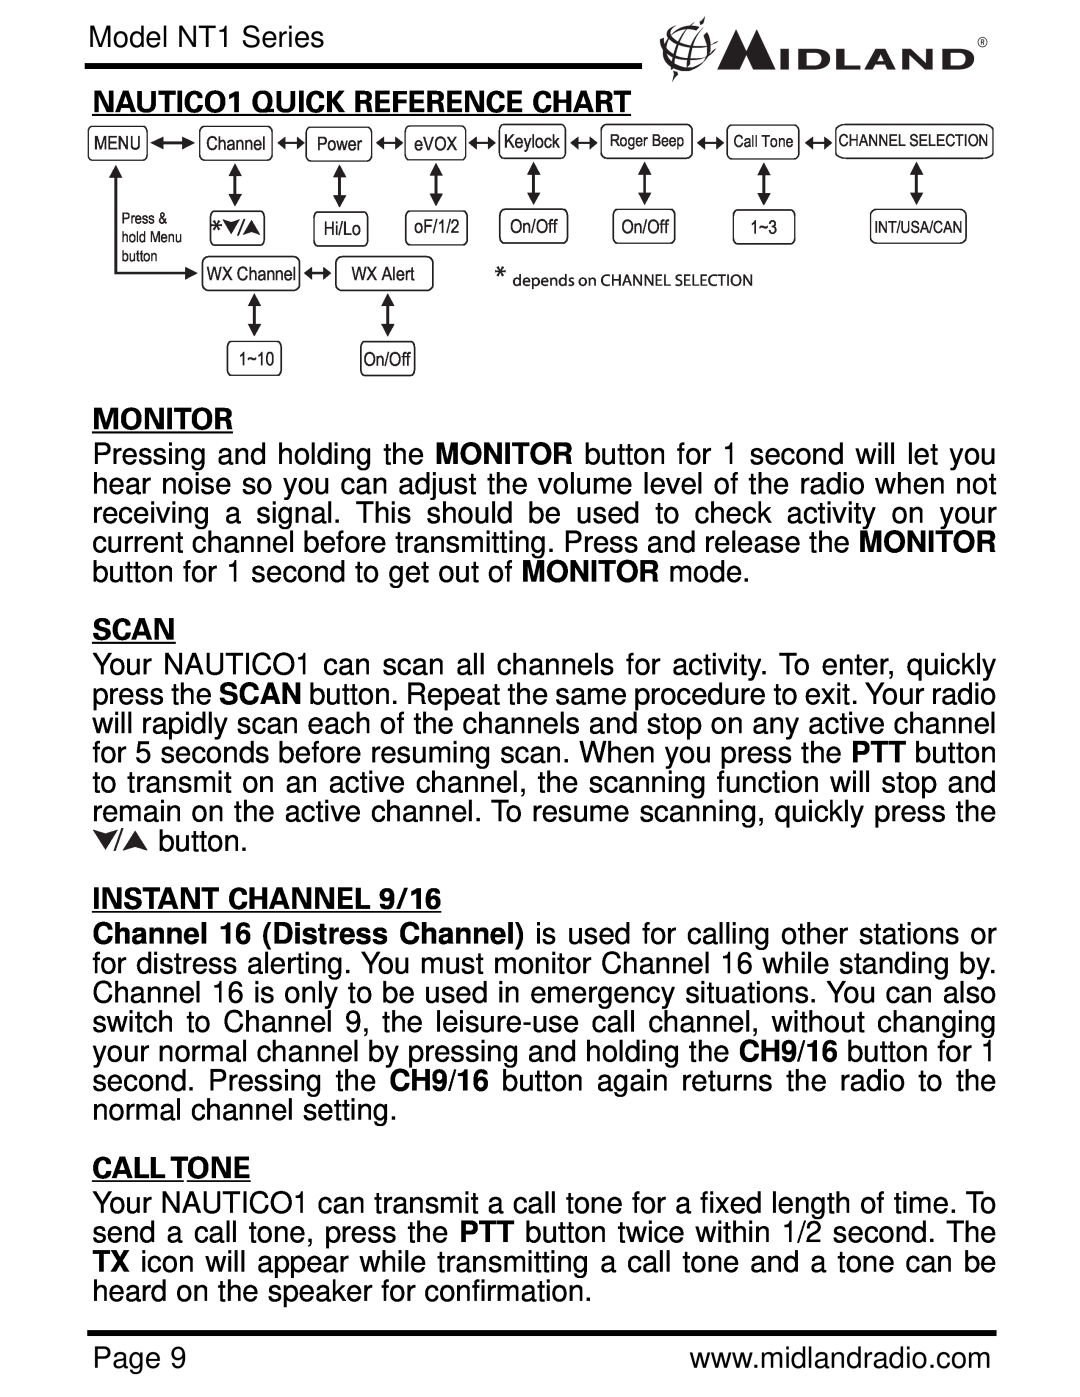 Midland Radio NT1 SERIES NAUTICO1 QUICK REFERENCE CHART, Monitor, Scan, INSTANT CHANNEL 9/16, Call Tone, Model NT1 Series 